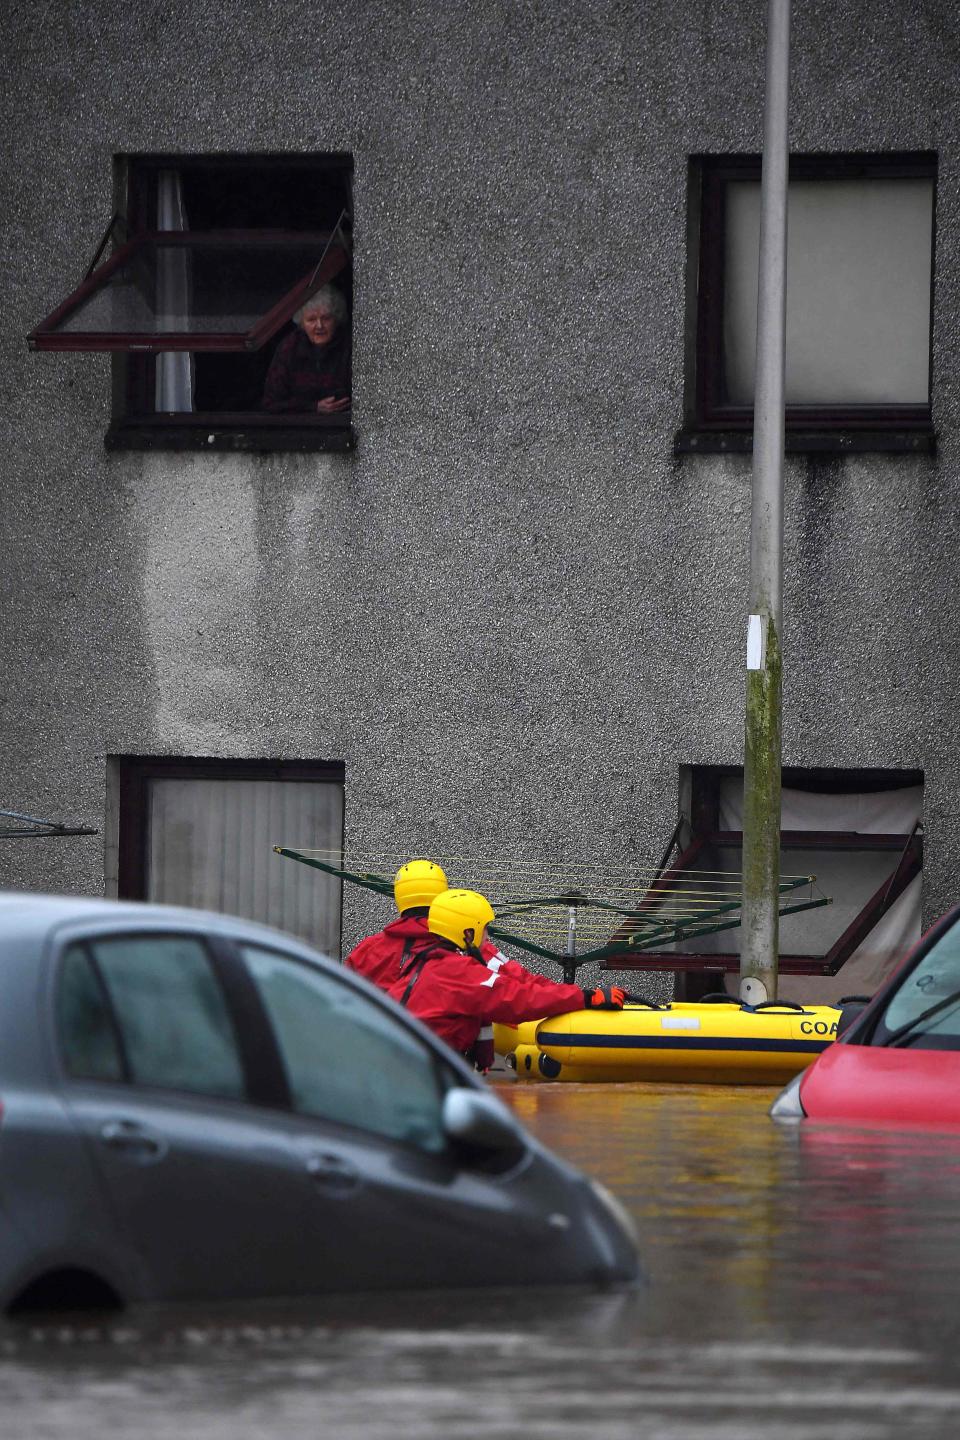 Coastguard rescue workers make their way to evacuate a trapped elderly resident in a flooded stret in Brechin (AFP via Getty Images)